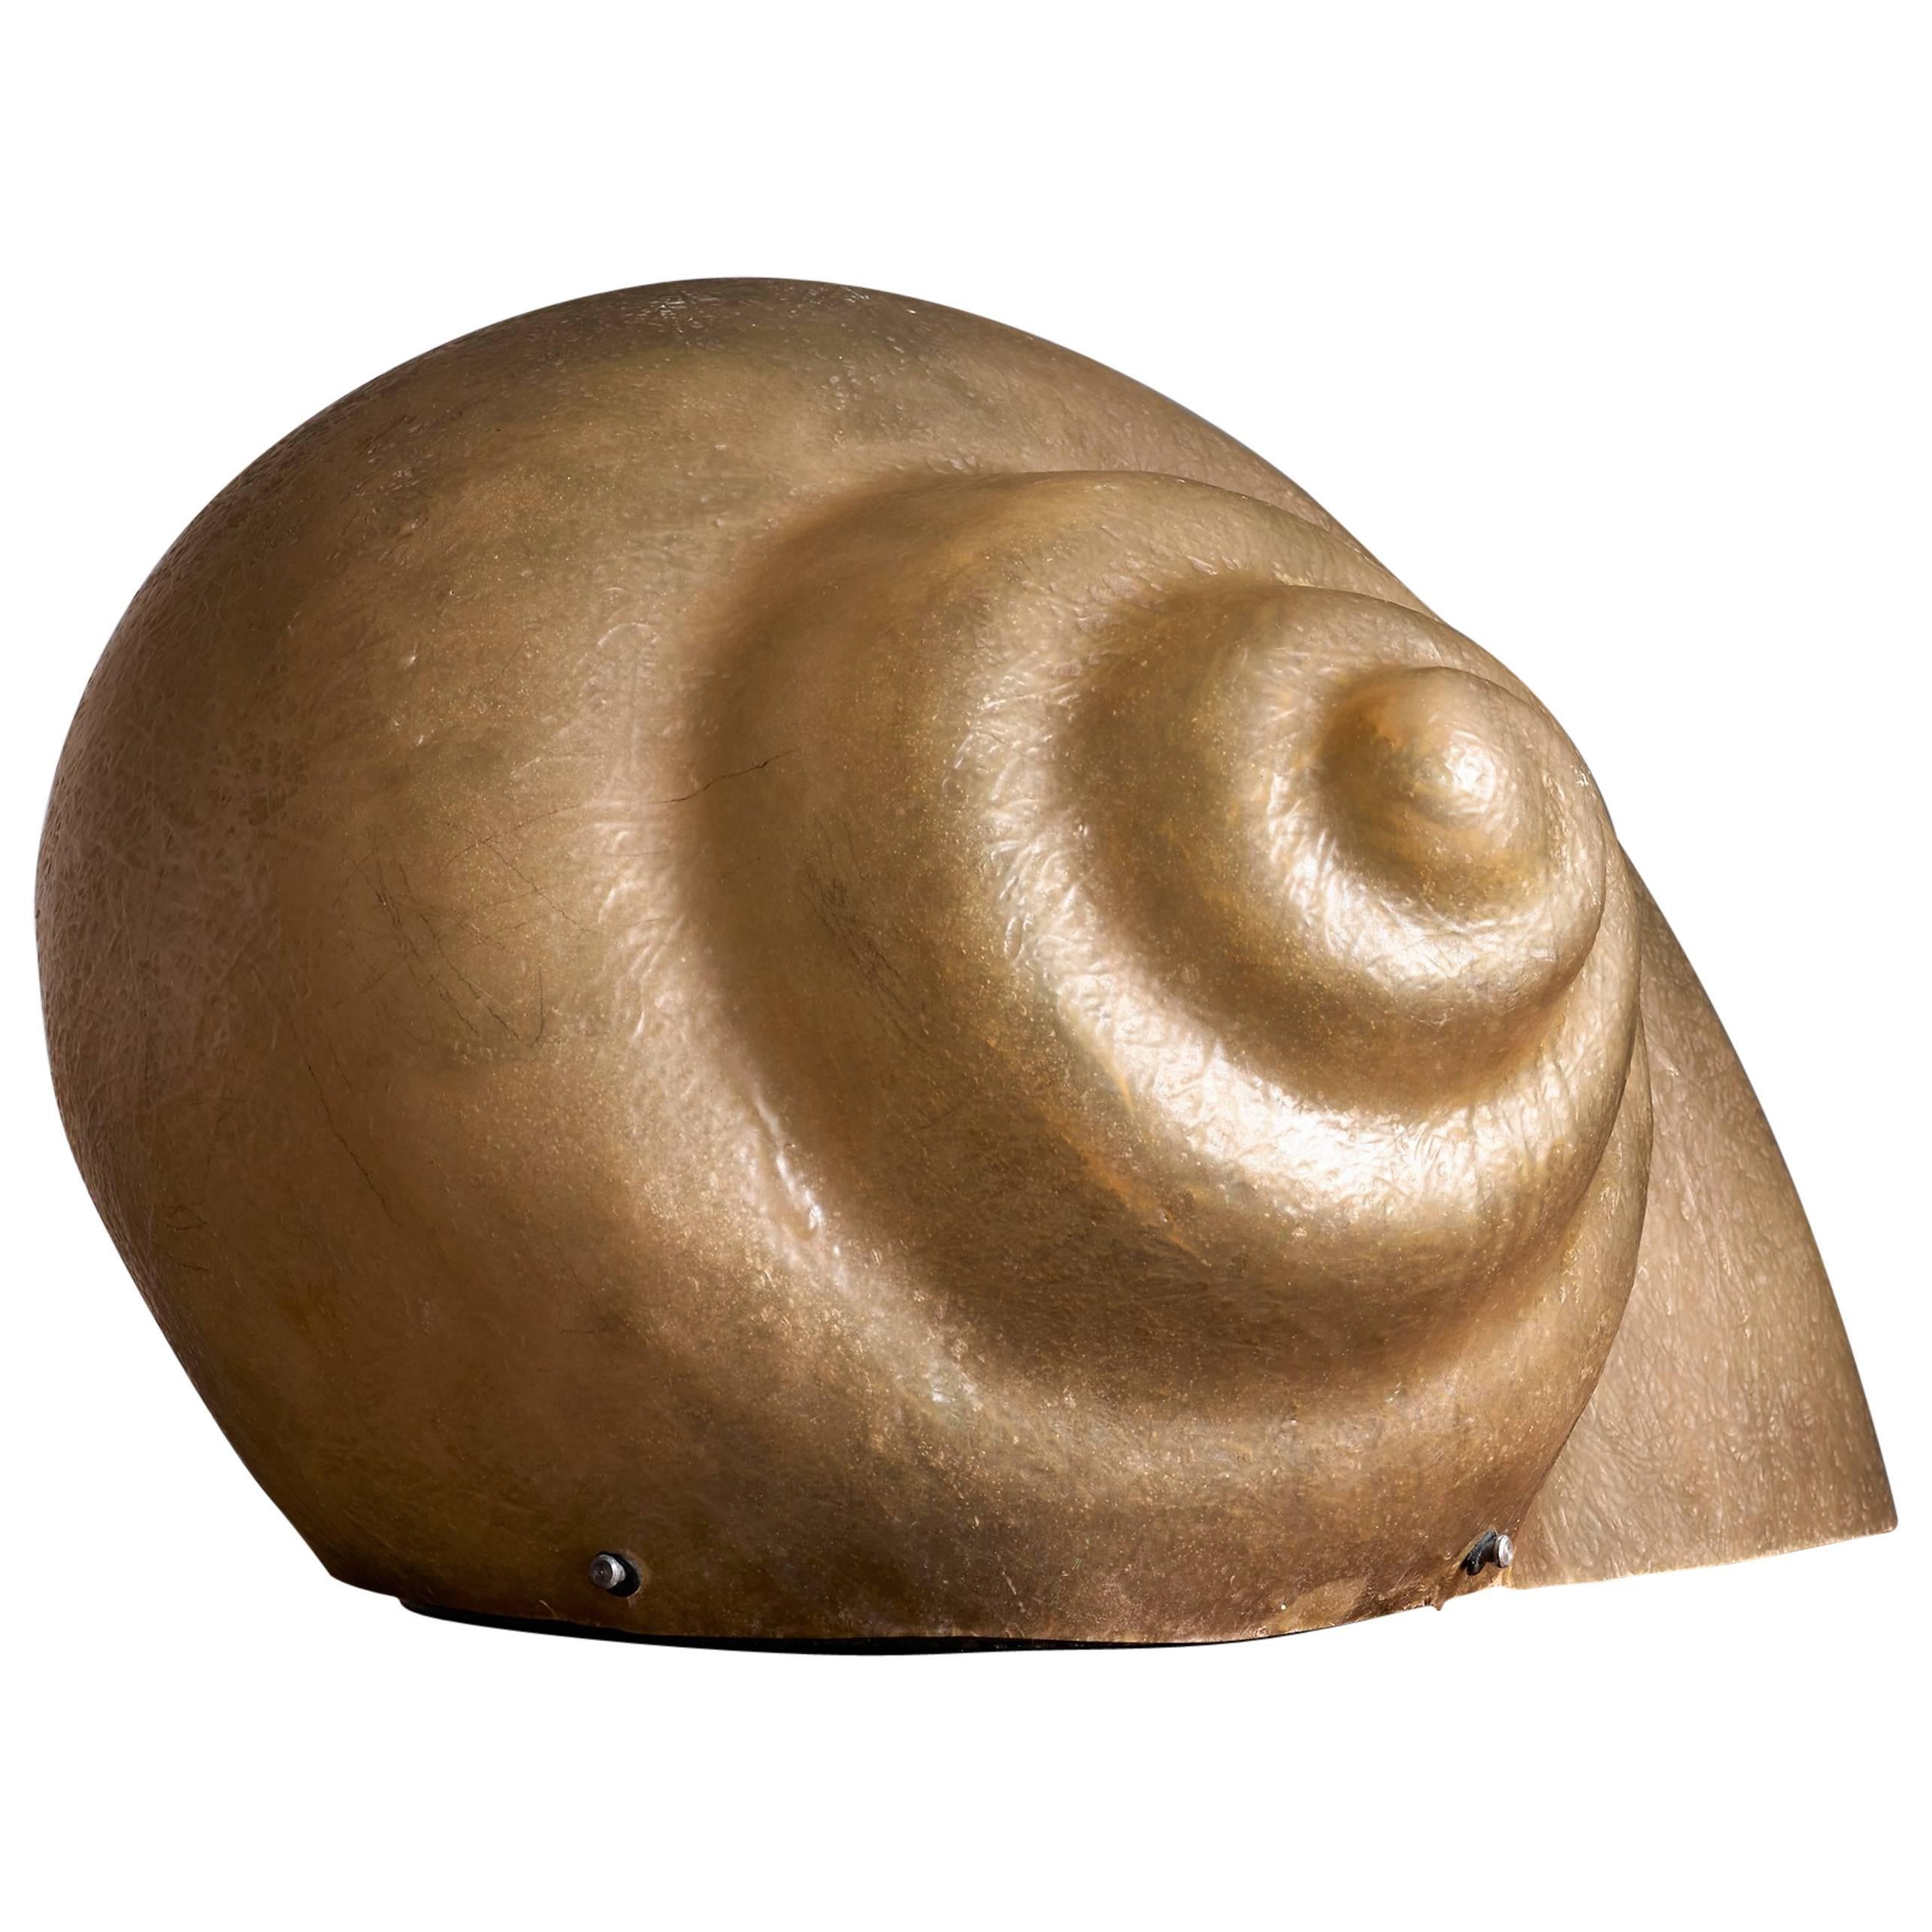 Sergio Camilli Snail Lamp for Bieffeplast, Italy, 1974 For Sale